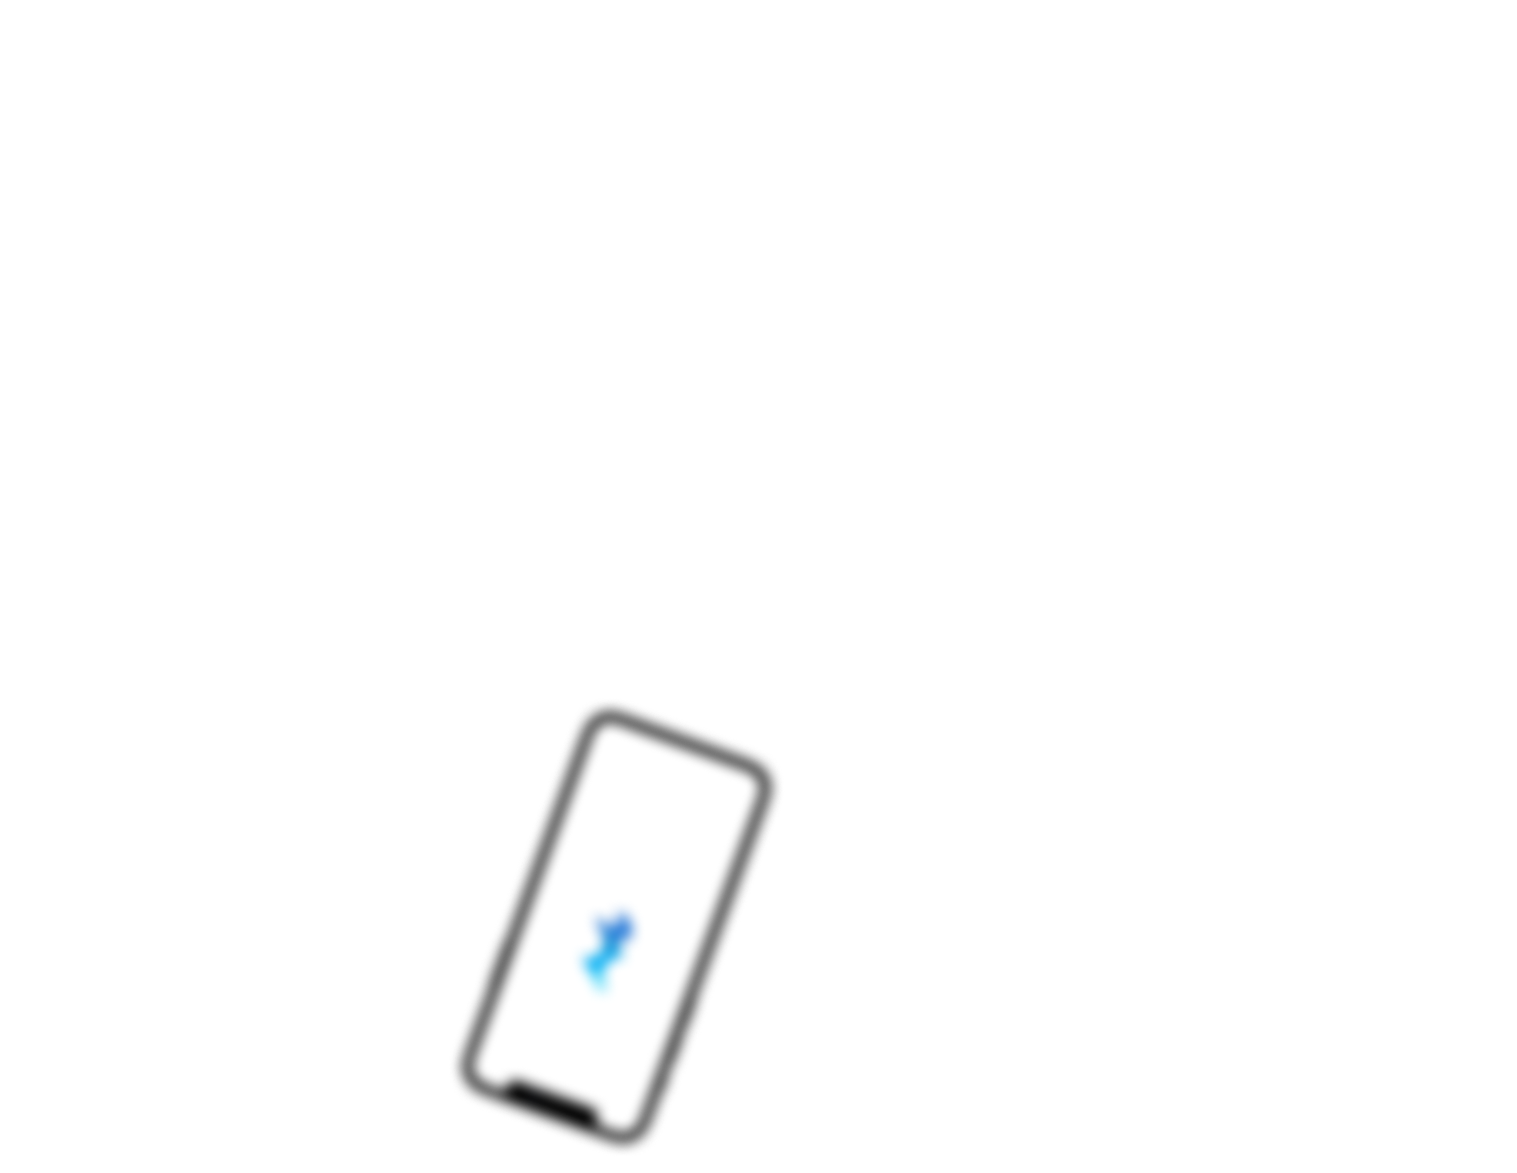 Picture of iPhone with Cadence logo